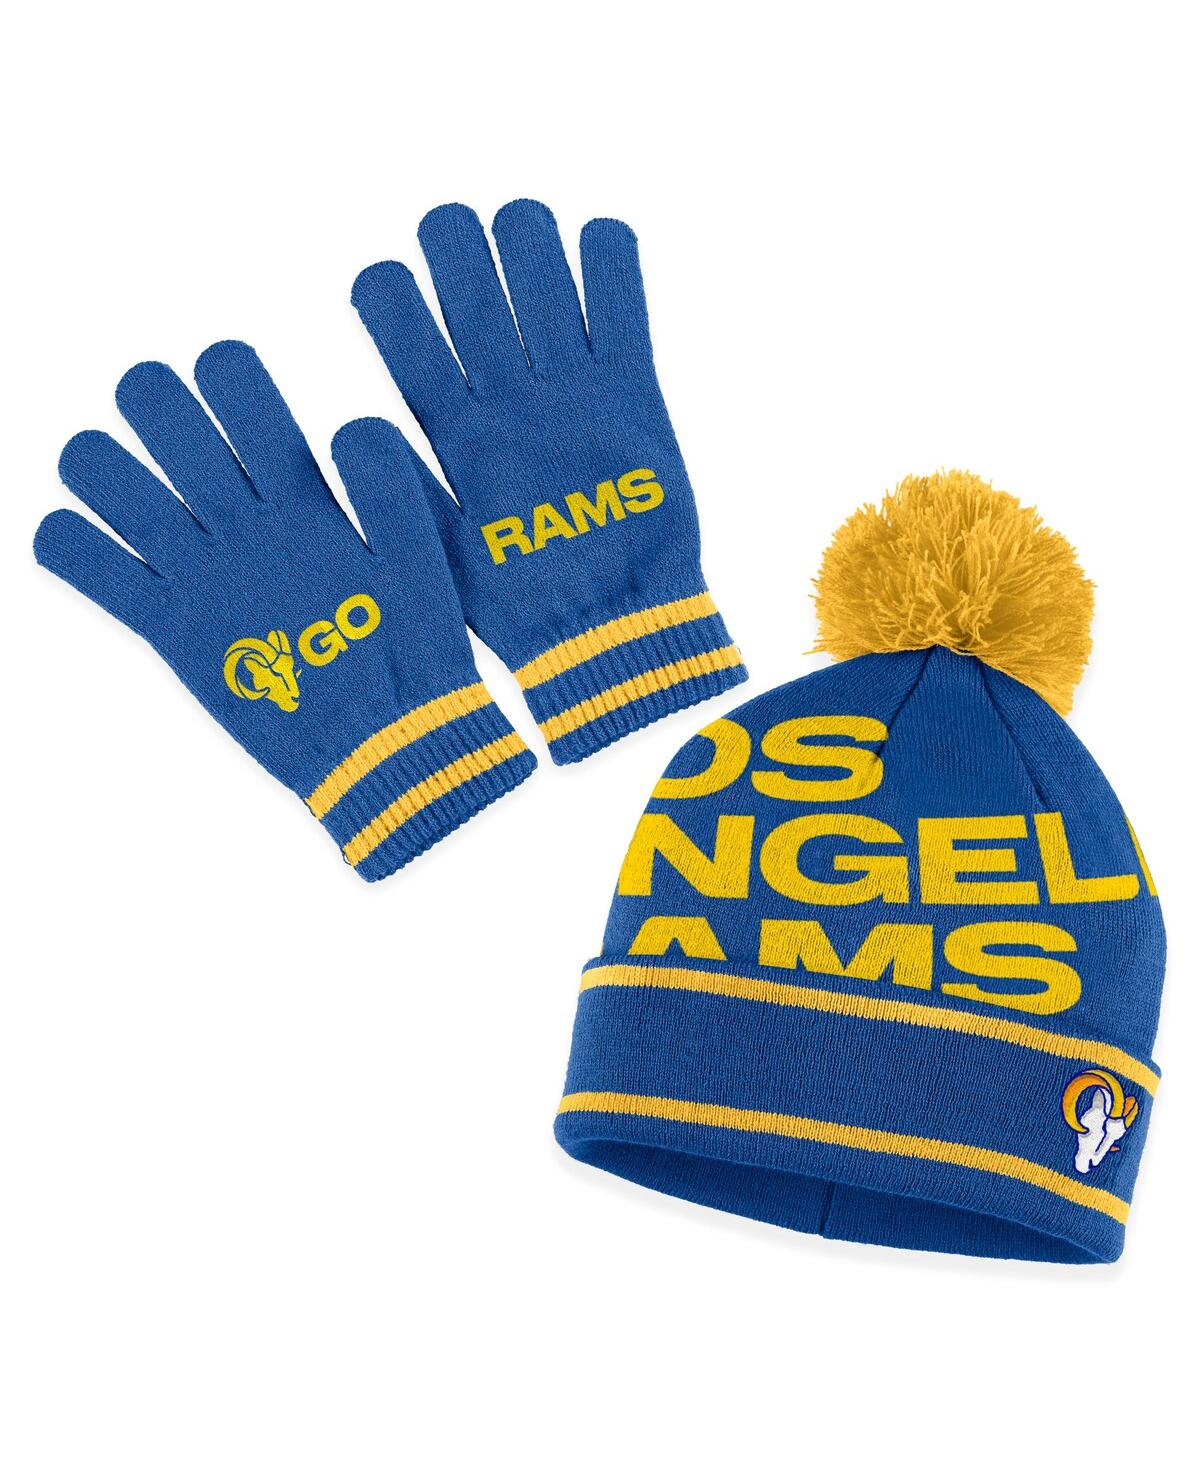 Shop Wear By Erin Andrews Women's  Royal Los Angeles Rams Double Jacquard Cuffed Knit Hat With Pom And Glo